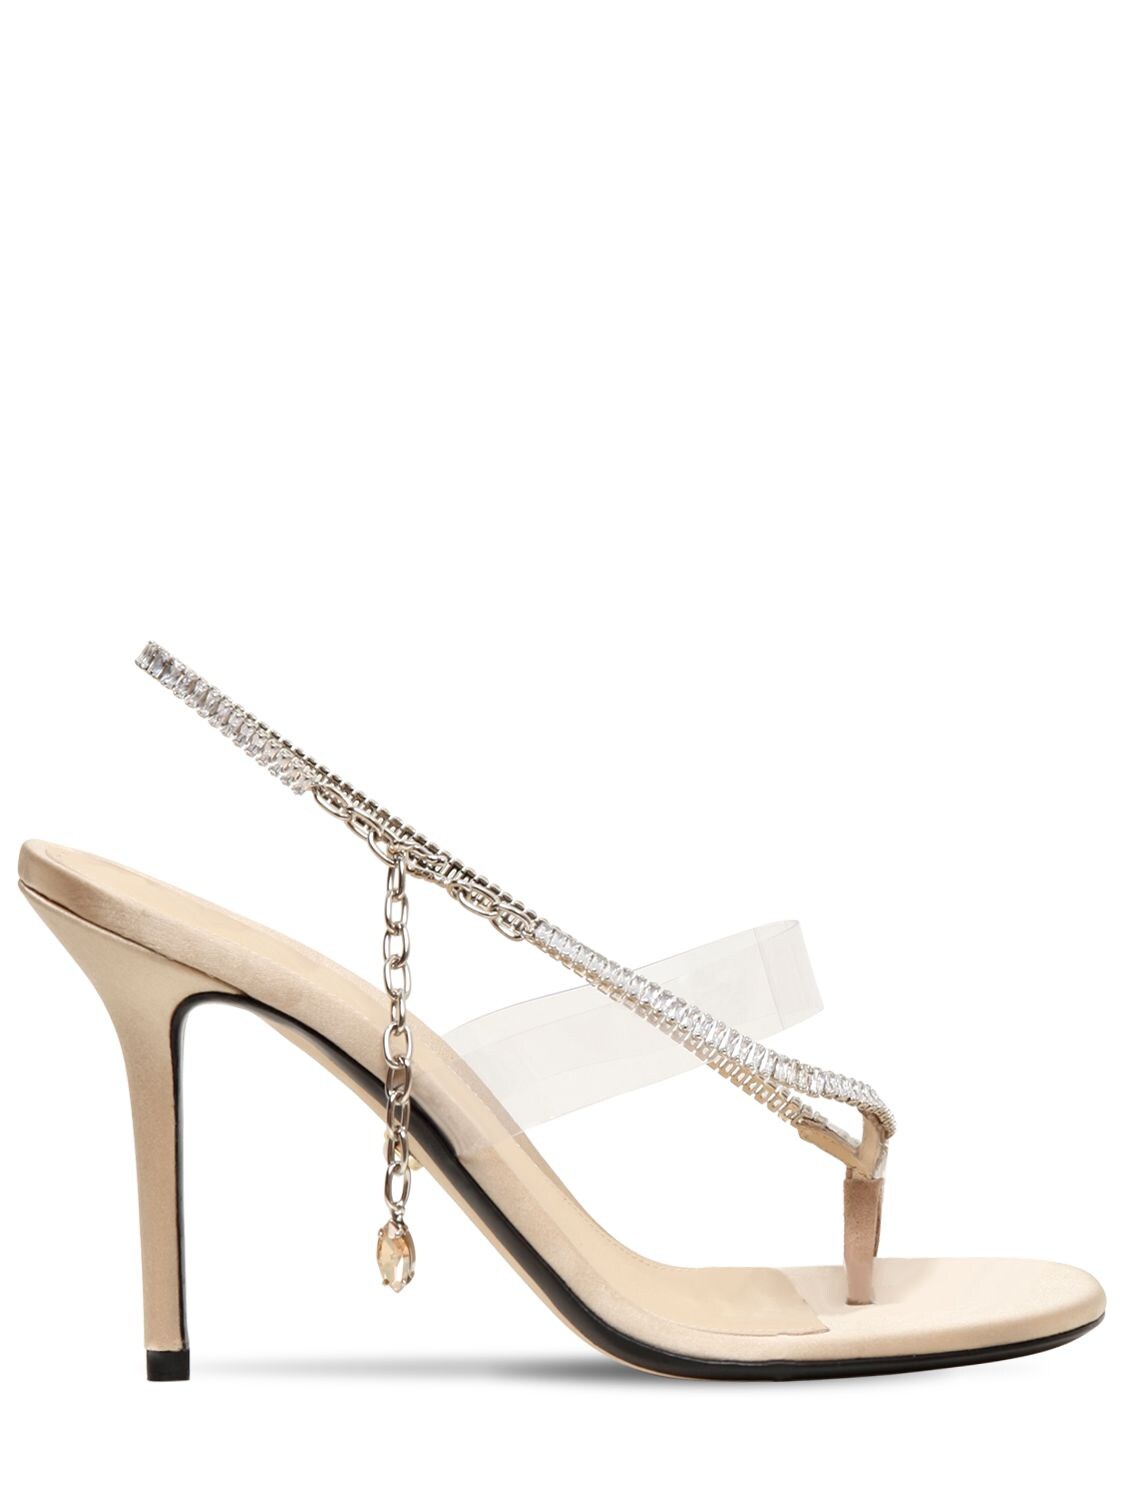 Alevì 90mm Muriel Satin & Crystal Sandals In Nude